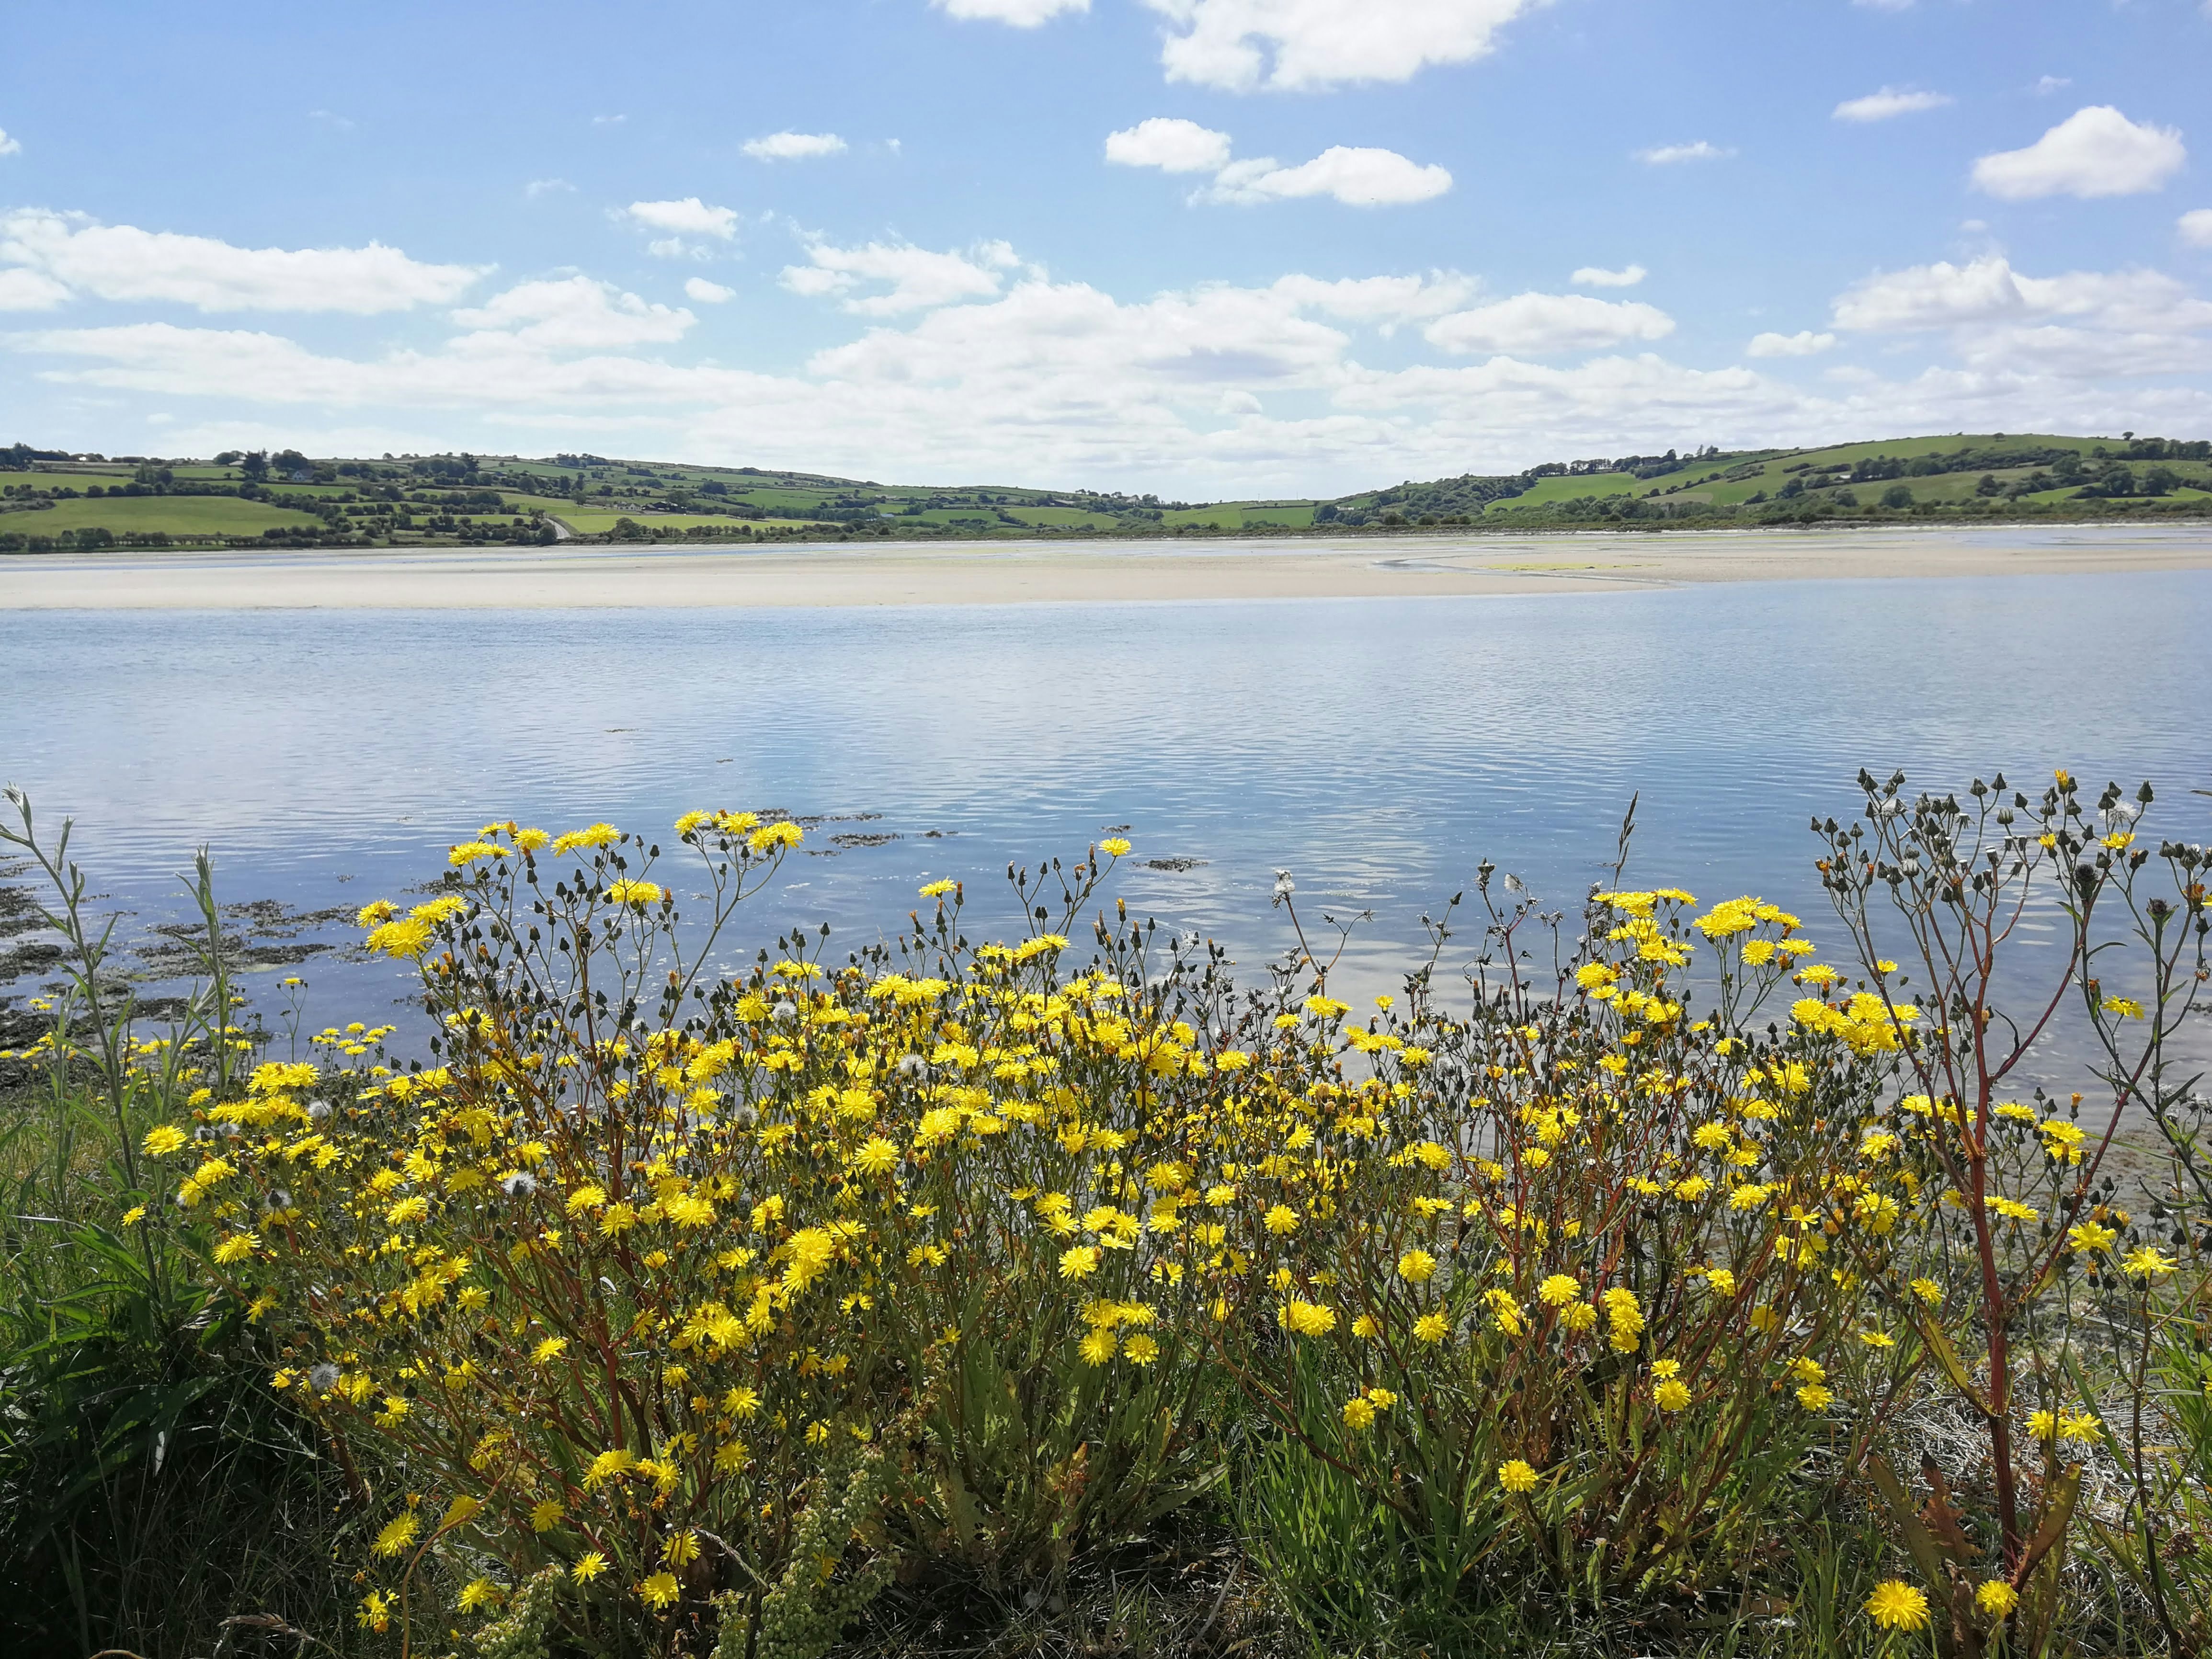 A tranquil view of a calm body of water on a bright day. In the distance is a pale sandy beach with a backdrop of rolling green hills; in the foreground is a large patch of bright yellow dandelions.